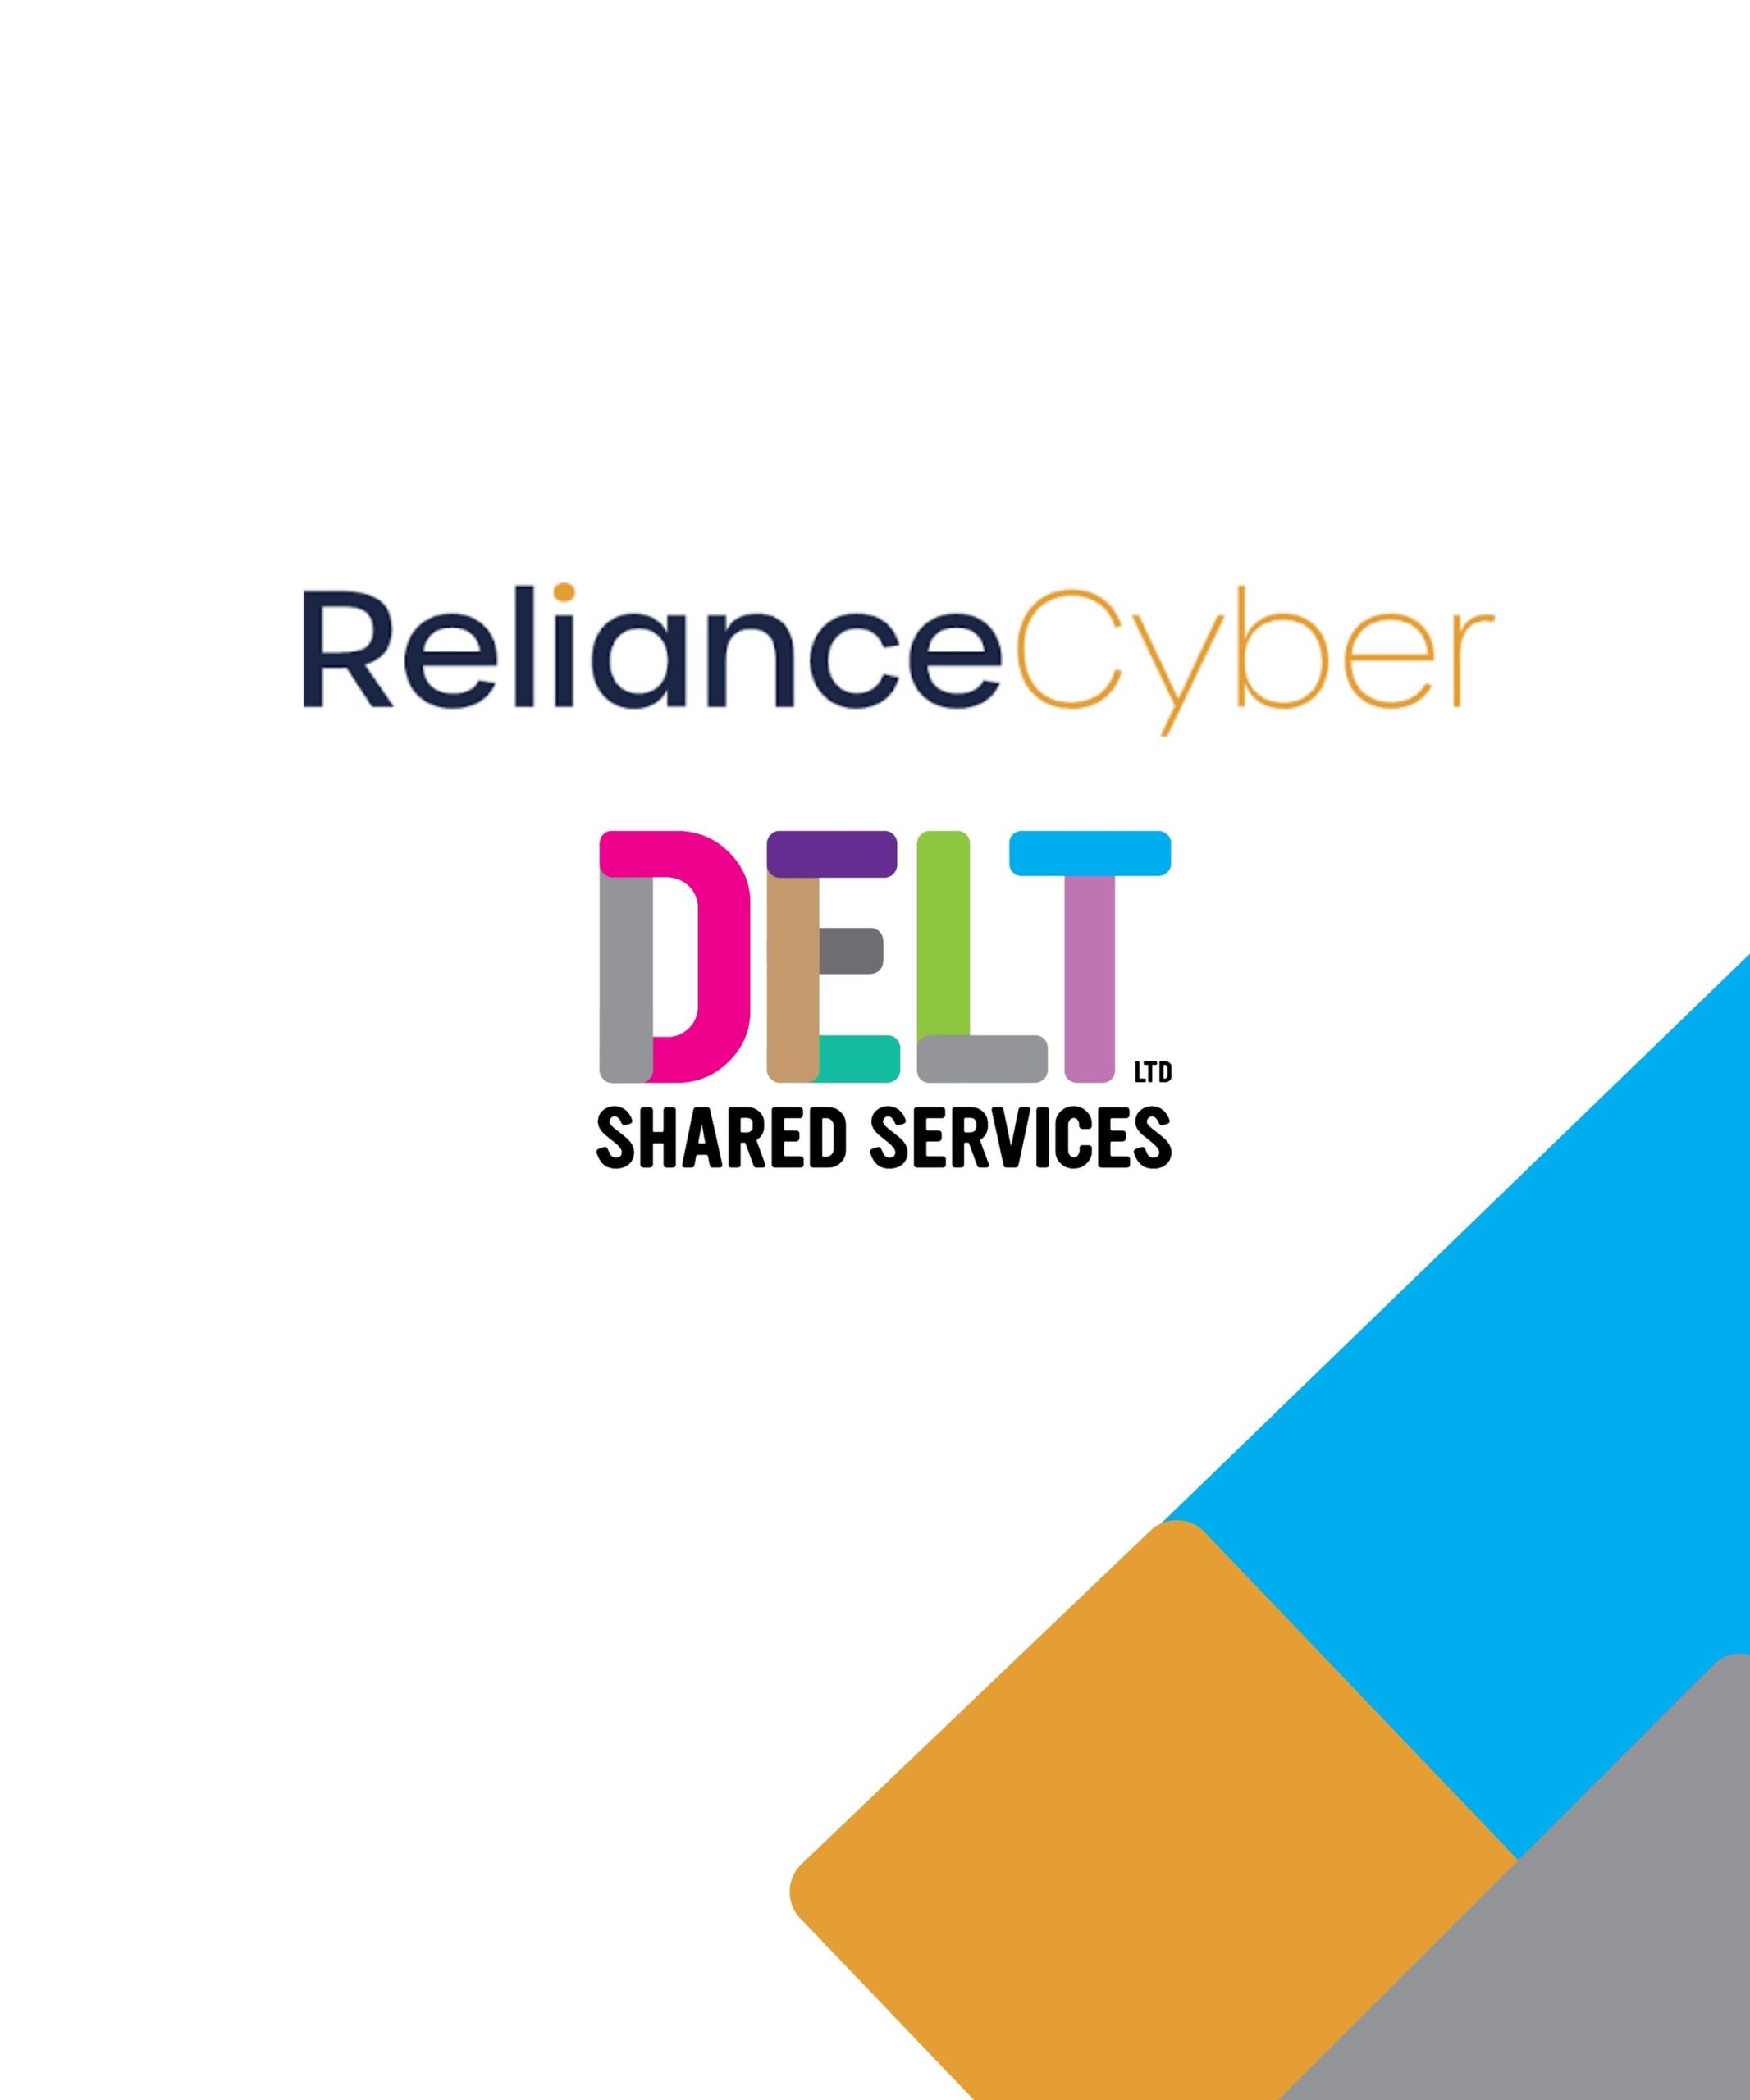 NEWS – Delt Partners with Reliance Cyber to Offer Industry-leading Cybersecurity Services to the Public Sector